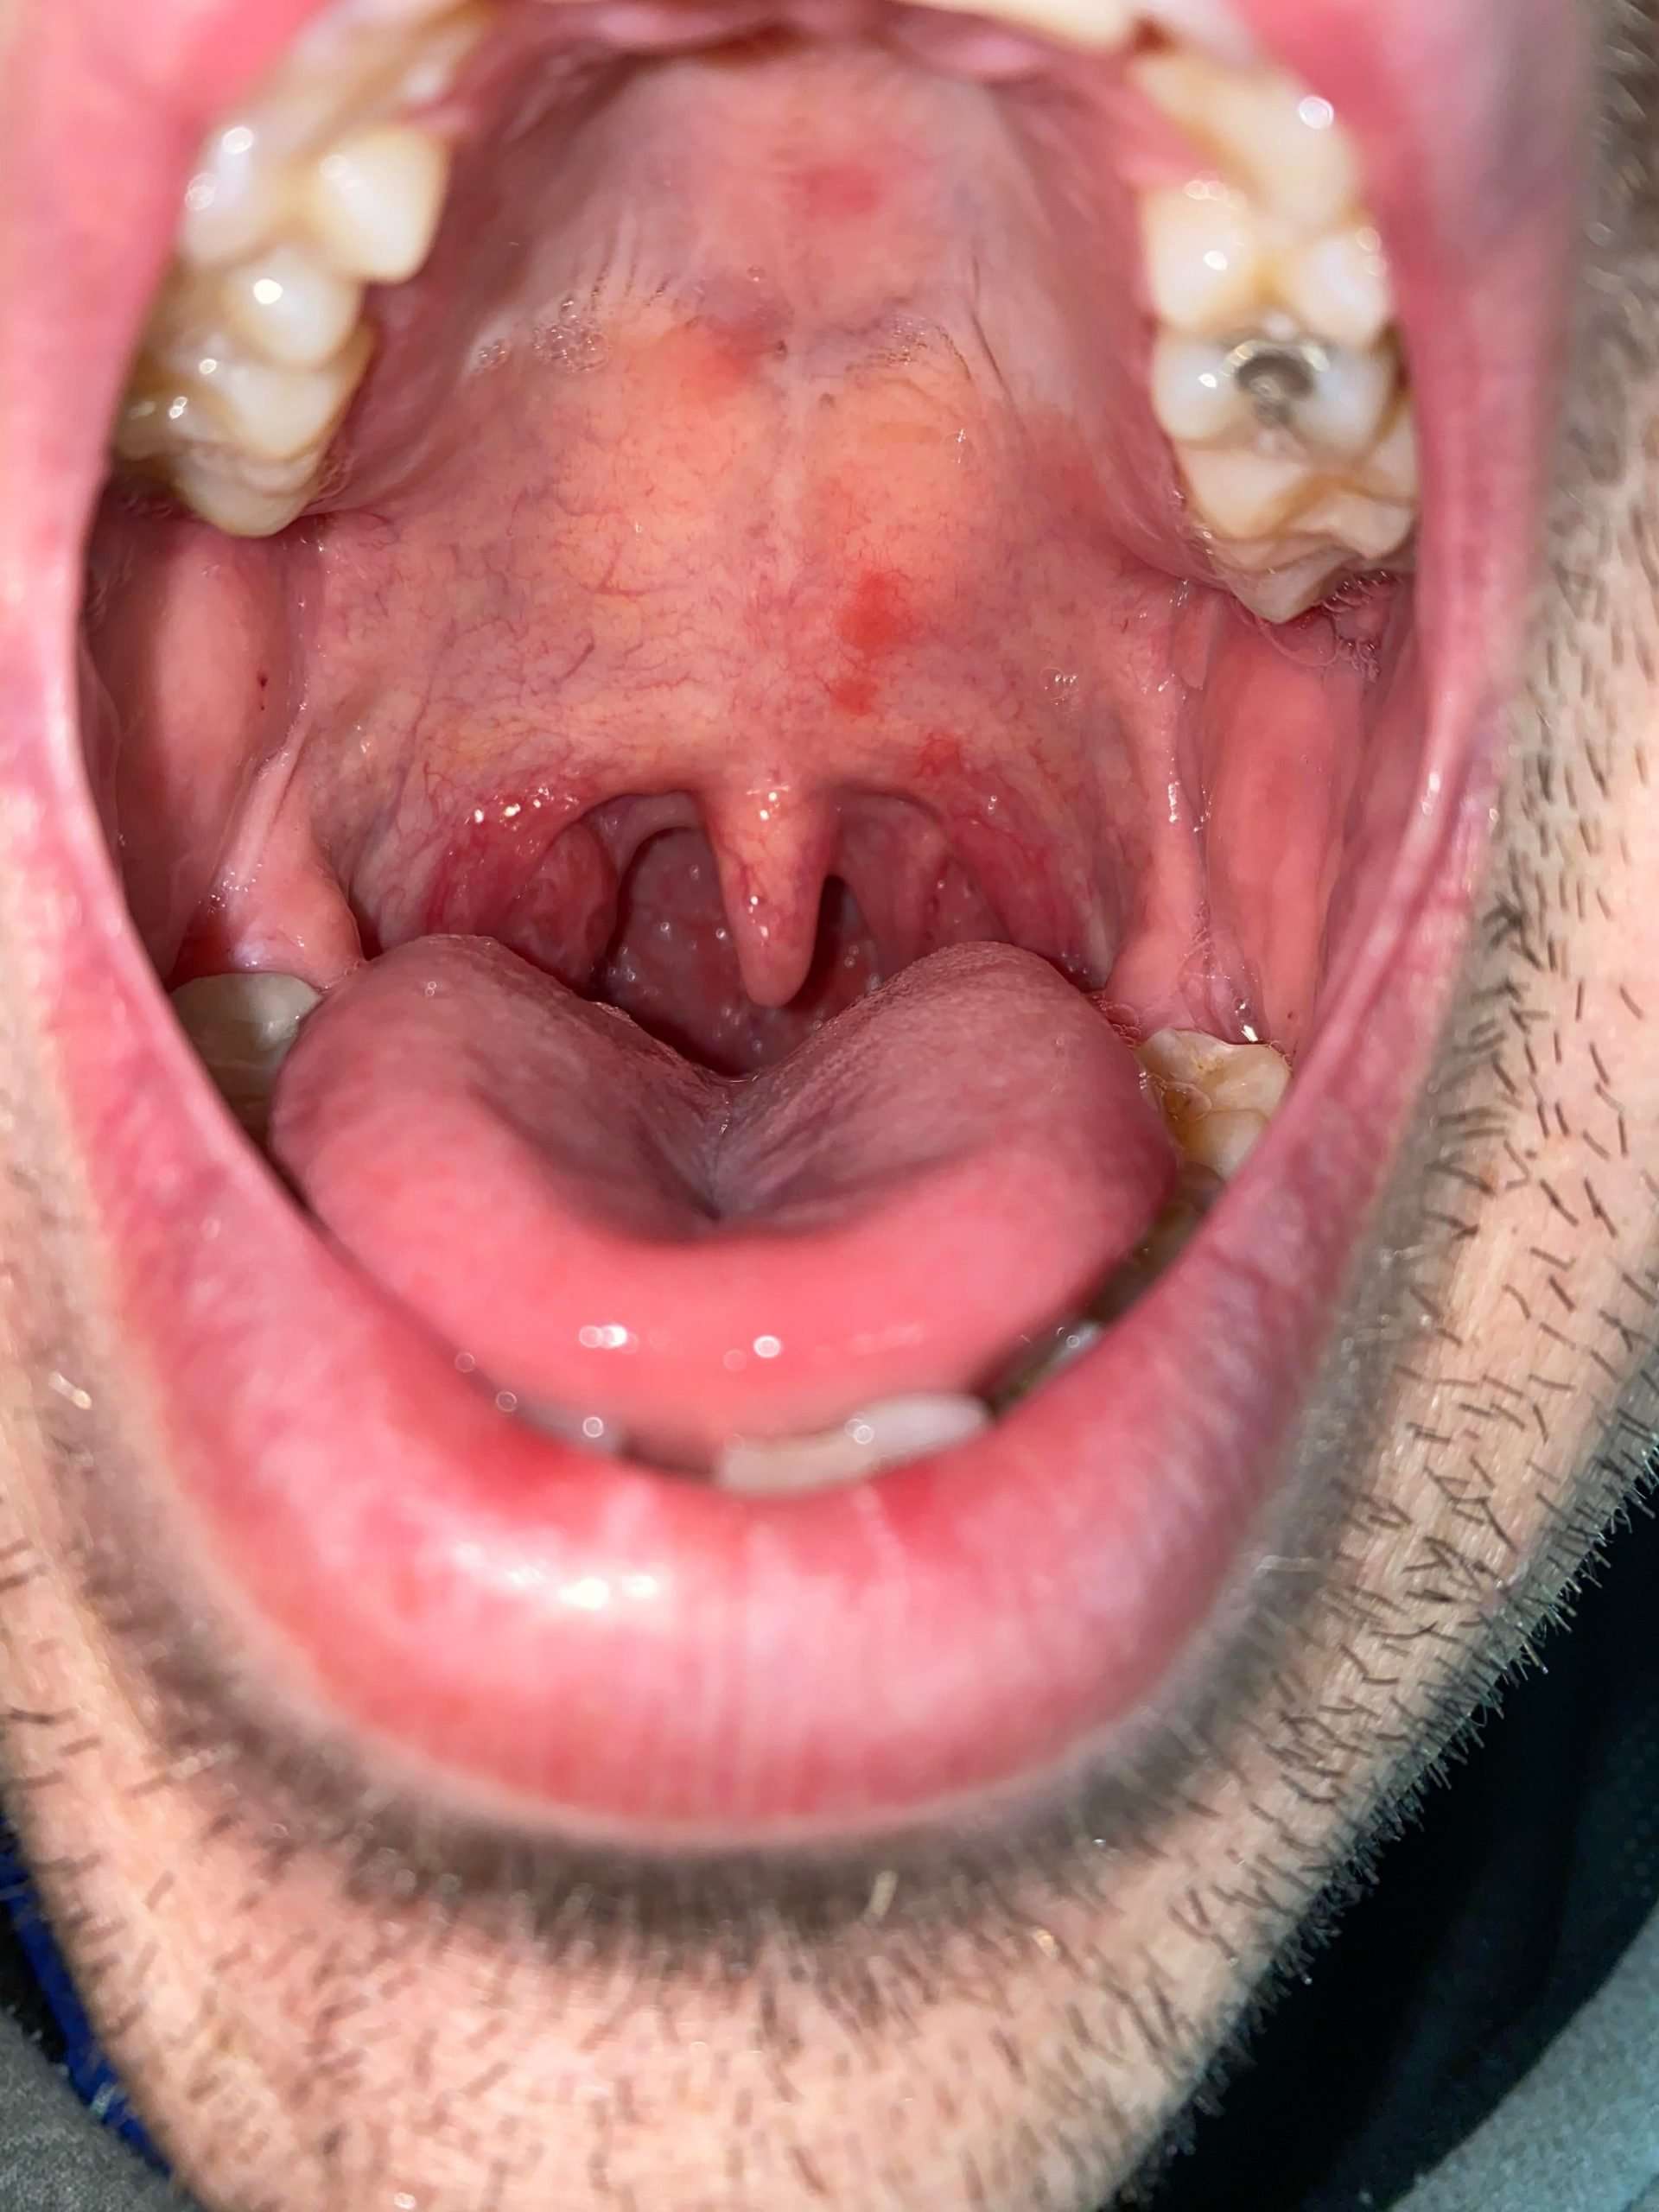 Strep throat or allergies? : ent